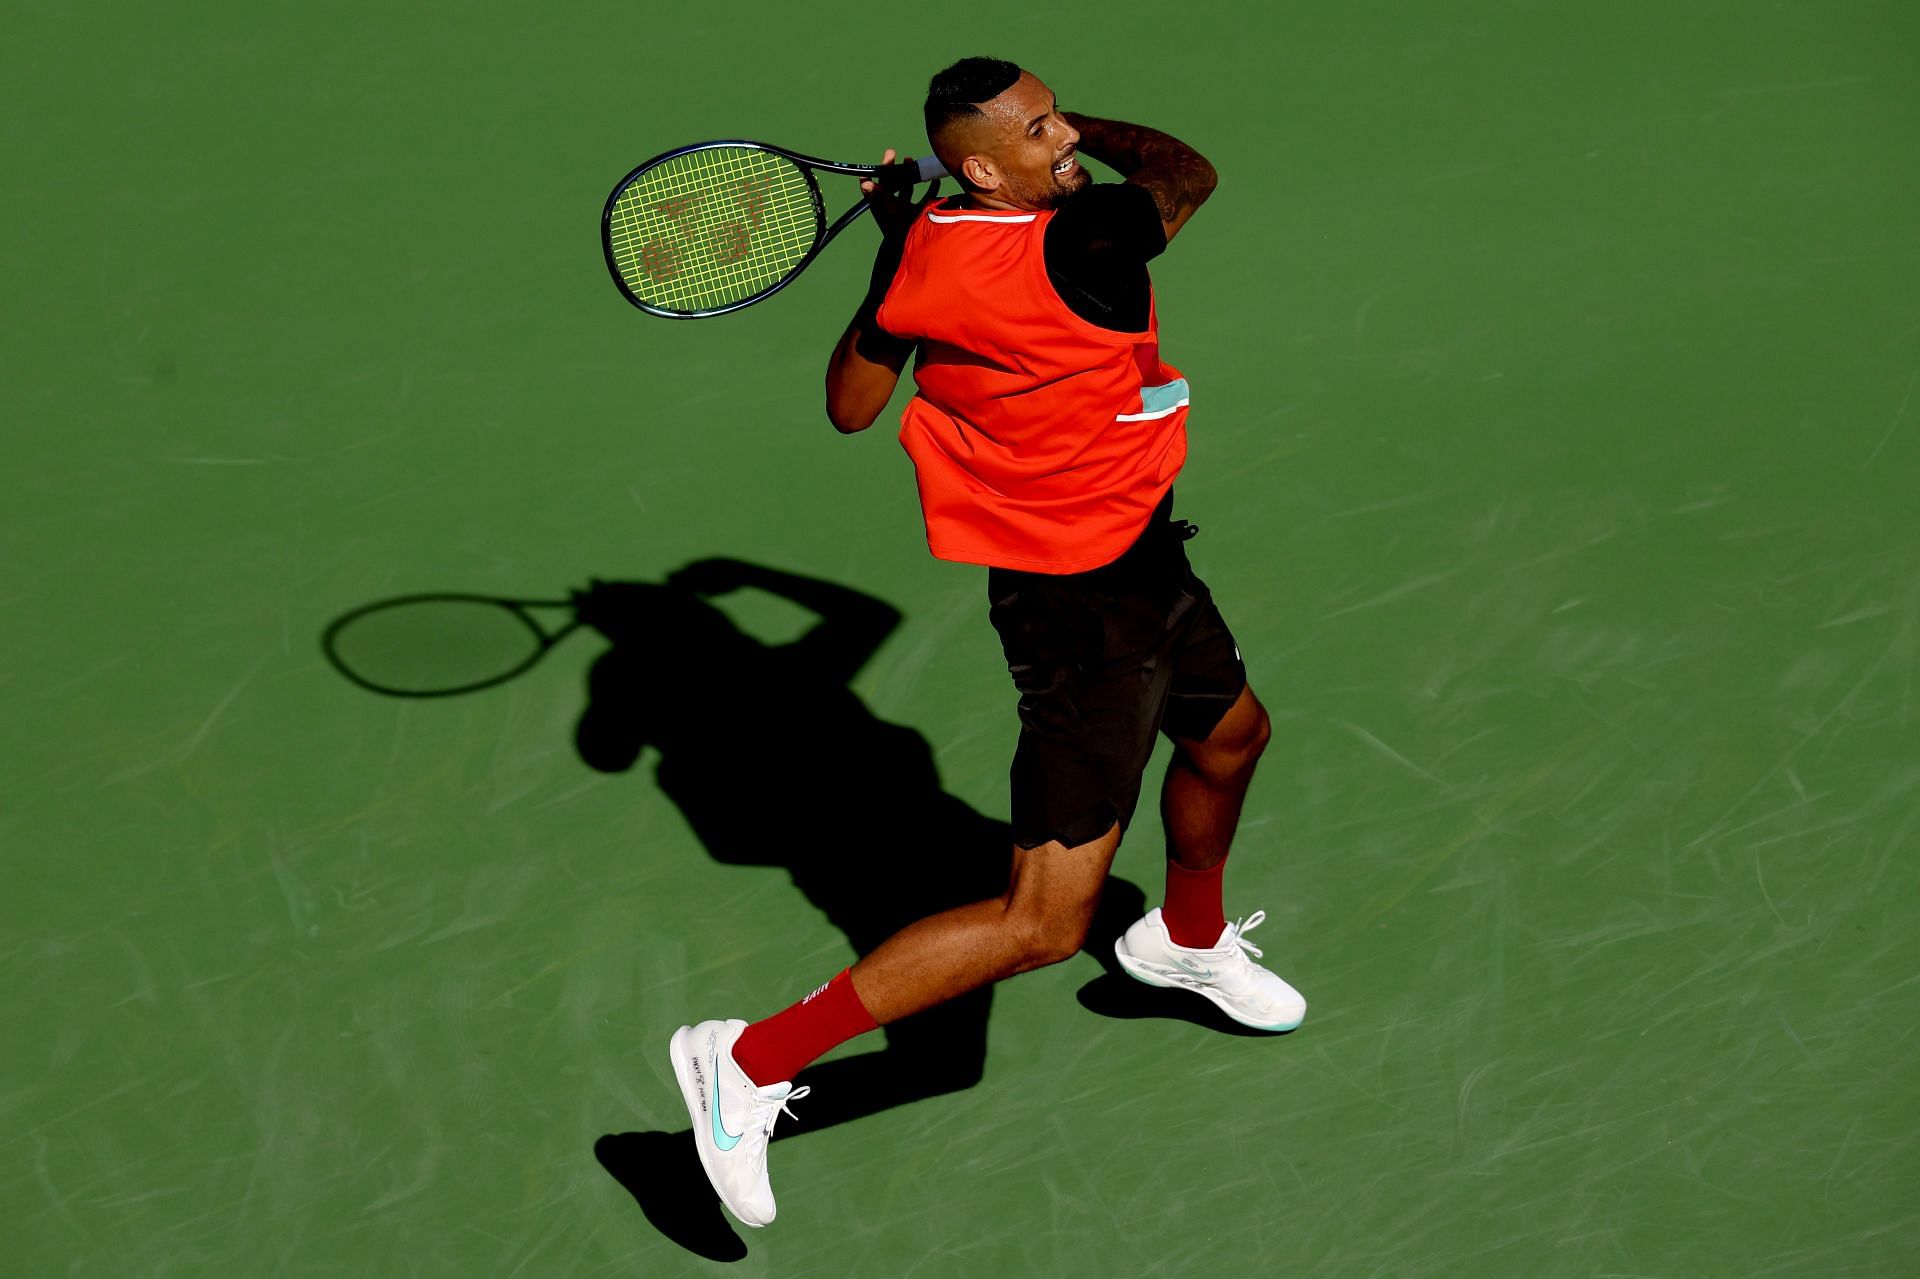 Nick Kyrgios during his match against Rafael Nadal at Indian Wells